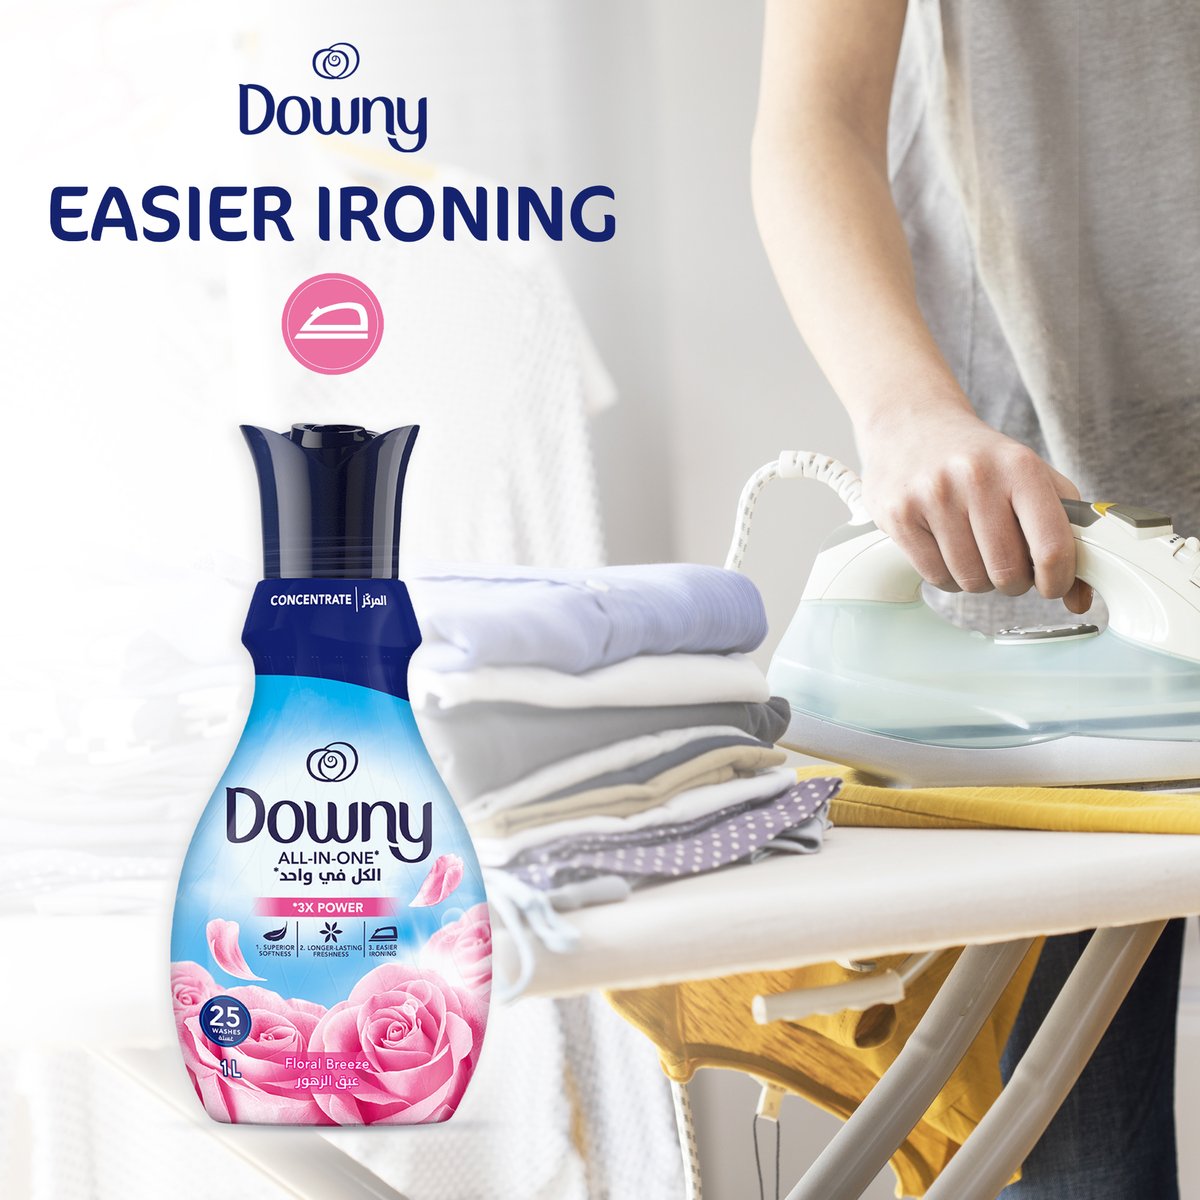 Downy Concentrate All-in-One Floral Breeze Fabric Softener 1 Litre